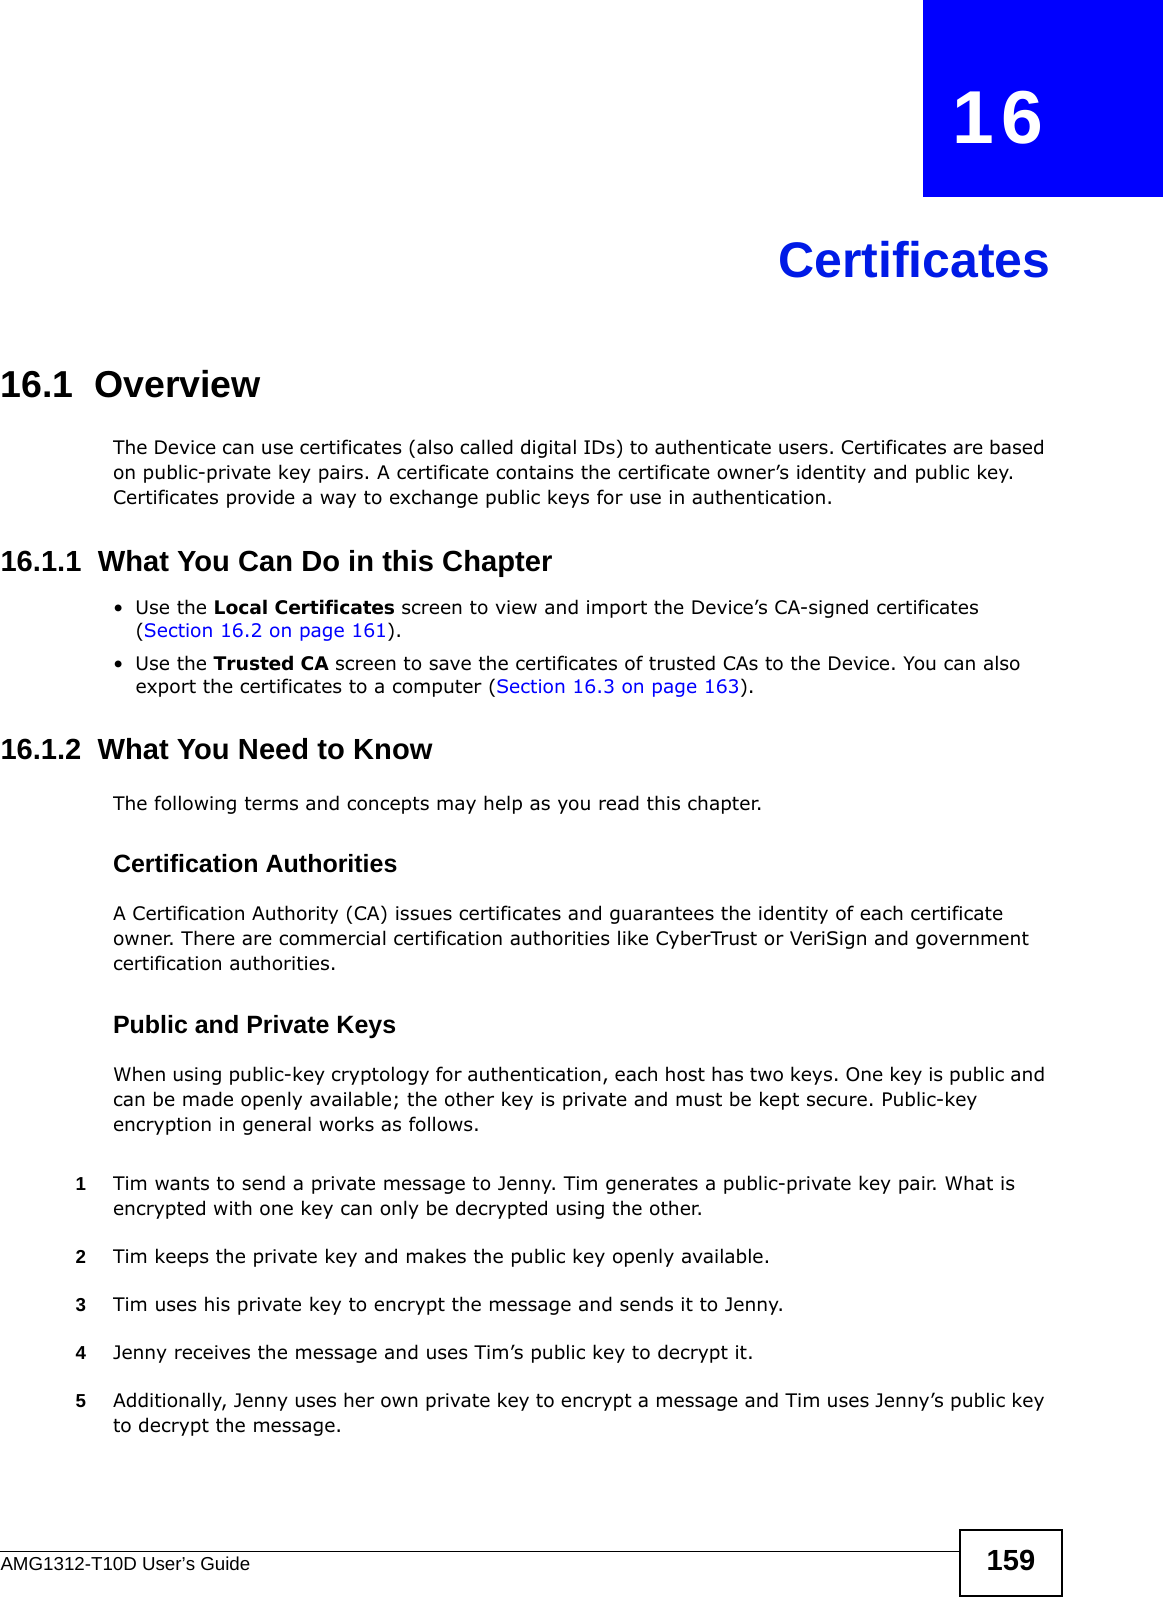 AMG1312-T10D User’s Guide 159CHAPTER   16Certificates16.1  OverviewThe Device can use certificates (also called digital IDs) to authenticate users. Certificates are based on public-private key pairs. A certificate contains the certificate owner’s identity and public key. Certificates provide a way to exchange public keys for use in authentication. 16.1.1  What You Can Do in this Chapter•Use the Local Certificates screen to view and import the Device’s CA-signed certificates (Section 16.2 on page 161).•Use the Trusted CA screen to save the certificates of trusted CAs to the Device. You can also export the certificates to a computer (Section 16.3 on page 163).16.1.2  What You Need to KnowThe following terms and concepts may help as you read this chapter.Certification AuthoritiesA Certification Authority (CA) issues certificates and guarantees the identity of each certificate owner. There are commercial certification authorities like CyberTrust or VeriSign and government certification authorities.Public and Private KeysWhen using public-key cryptology for authentication, each host has two keys. One key is public and can be made openly available; the other key is private and must be kept secure. Public-key encryption in general works as follows. 1Tim wants to send a private message to Jenny. Tim generates a public-private key pair. What is encrypted with one key can only be decrypted using the other.2Tim keeps the private key and makes the public key openly available.3Tim uses his private key to encrypt the message and sends it to Jenny.4Jenny receives the message and uses Tim’s public key to decrypt it.5Additionally, Jenny uses her own private key to encrypt a message and Tim uses Jenny’s public key to decrypt the message.